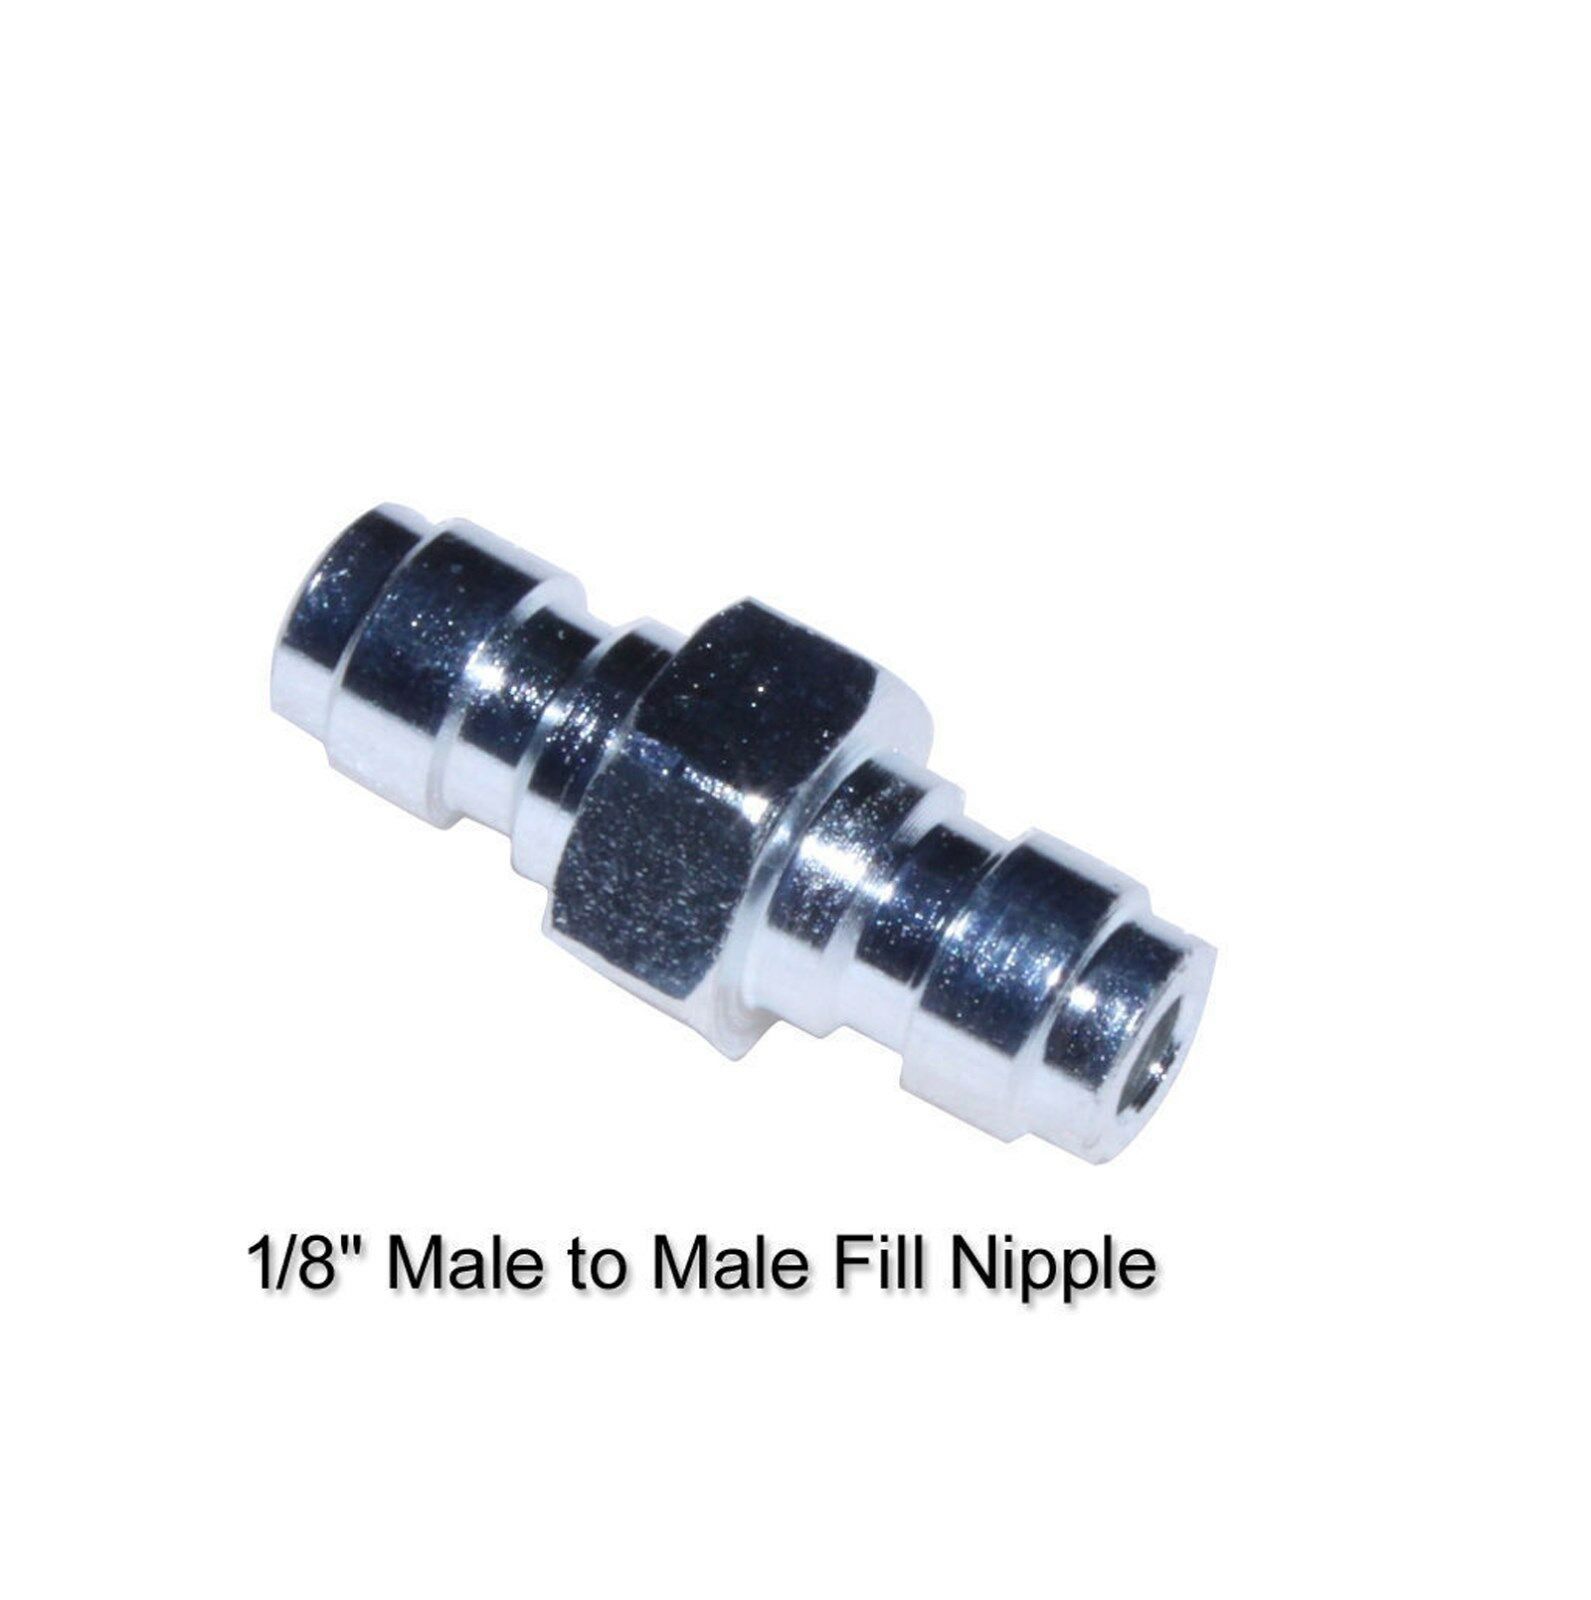 P&w High Pressure Open Flow Male To Male 1/8" Fill Nipple Up To 4500psi  10402